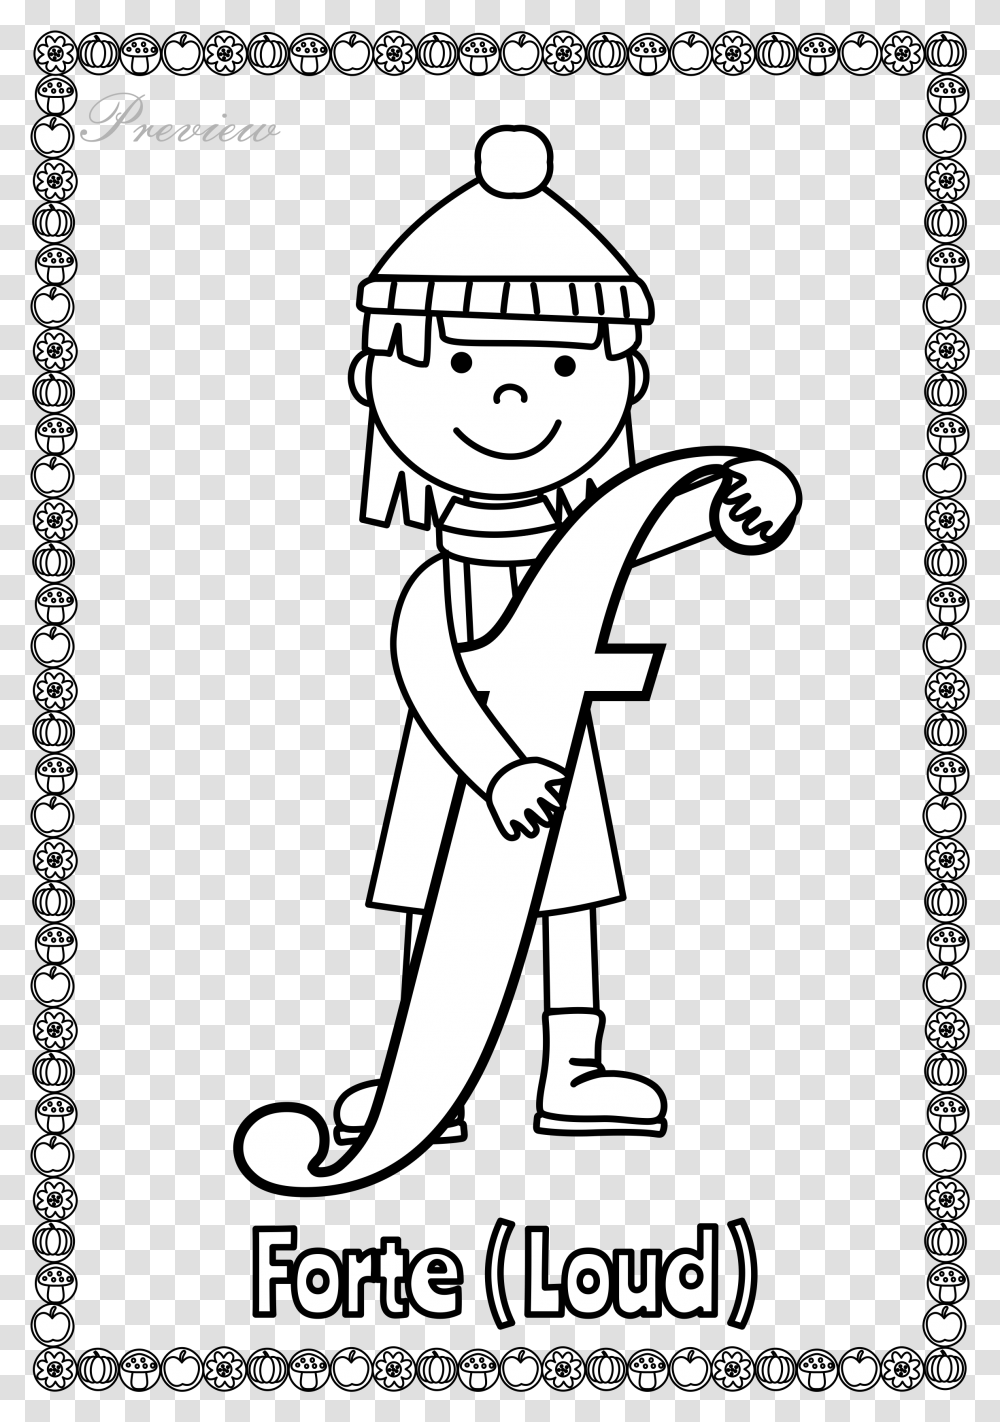 Piano Forte Coloring Sheet, Poster, Advertisement, Astronaut, Stencil Transparent Png